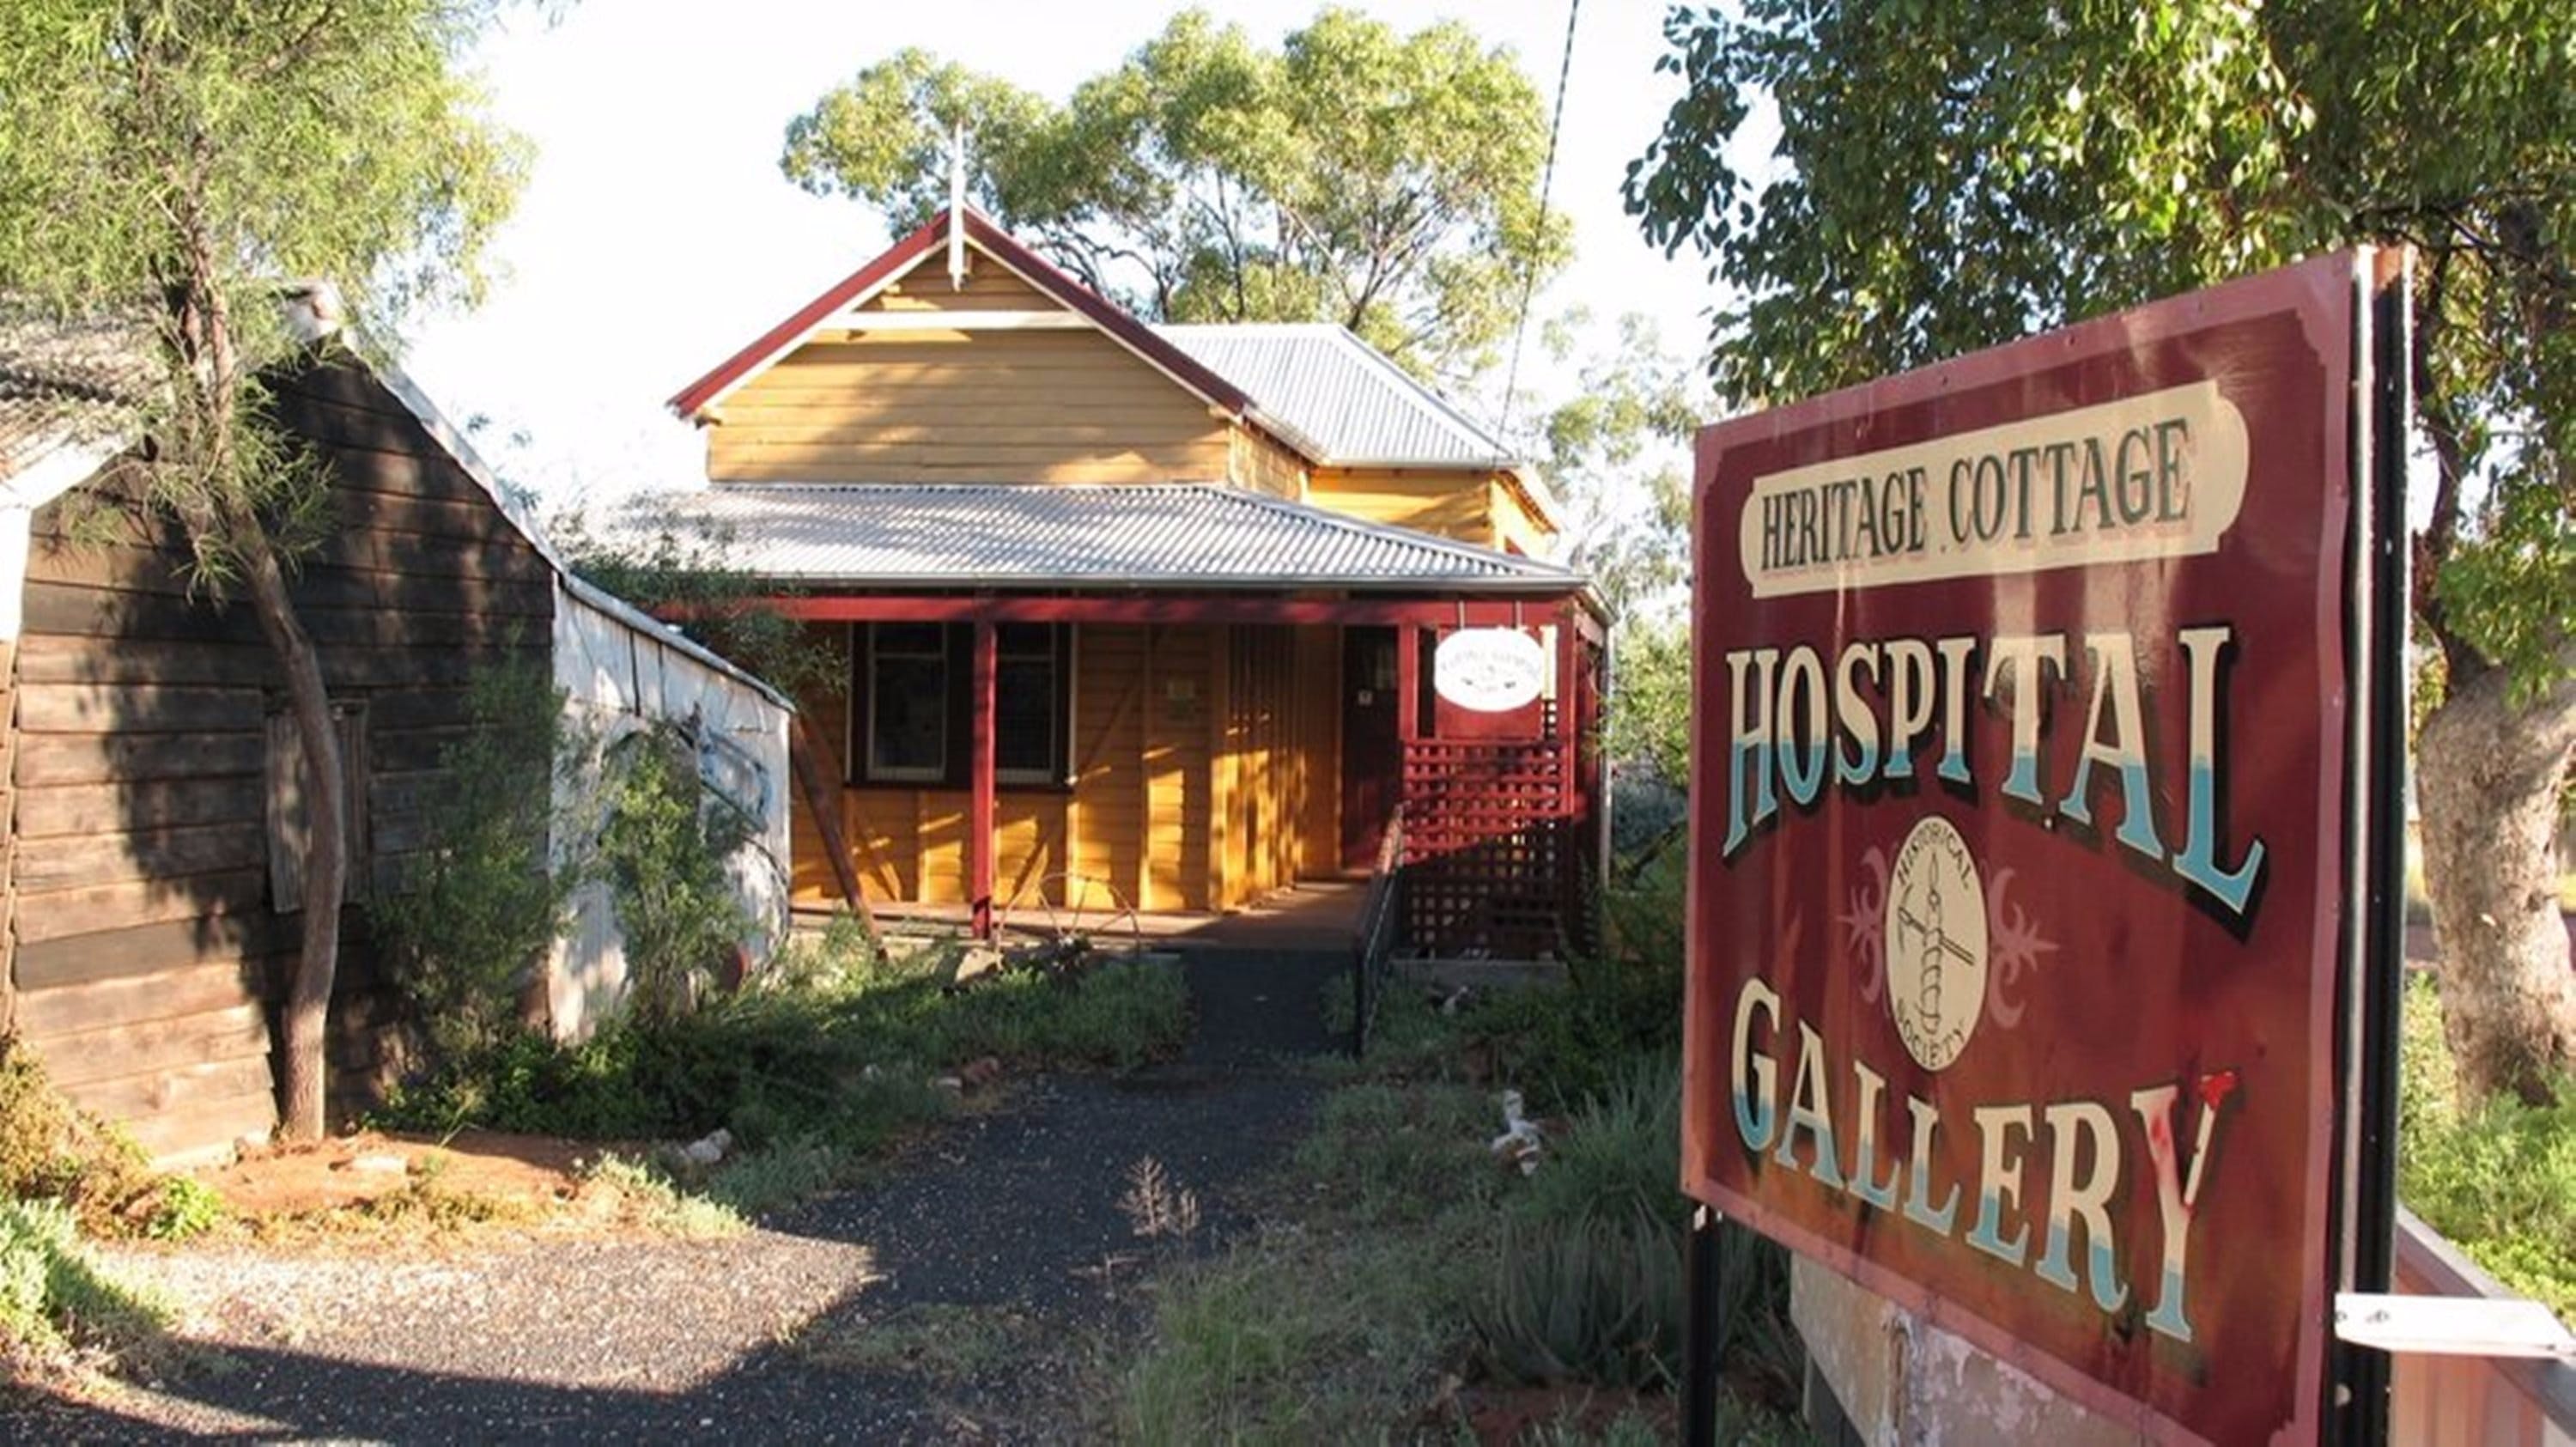 Lightning Ridge Heritage Cottage - Find Attractions